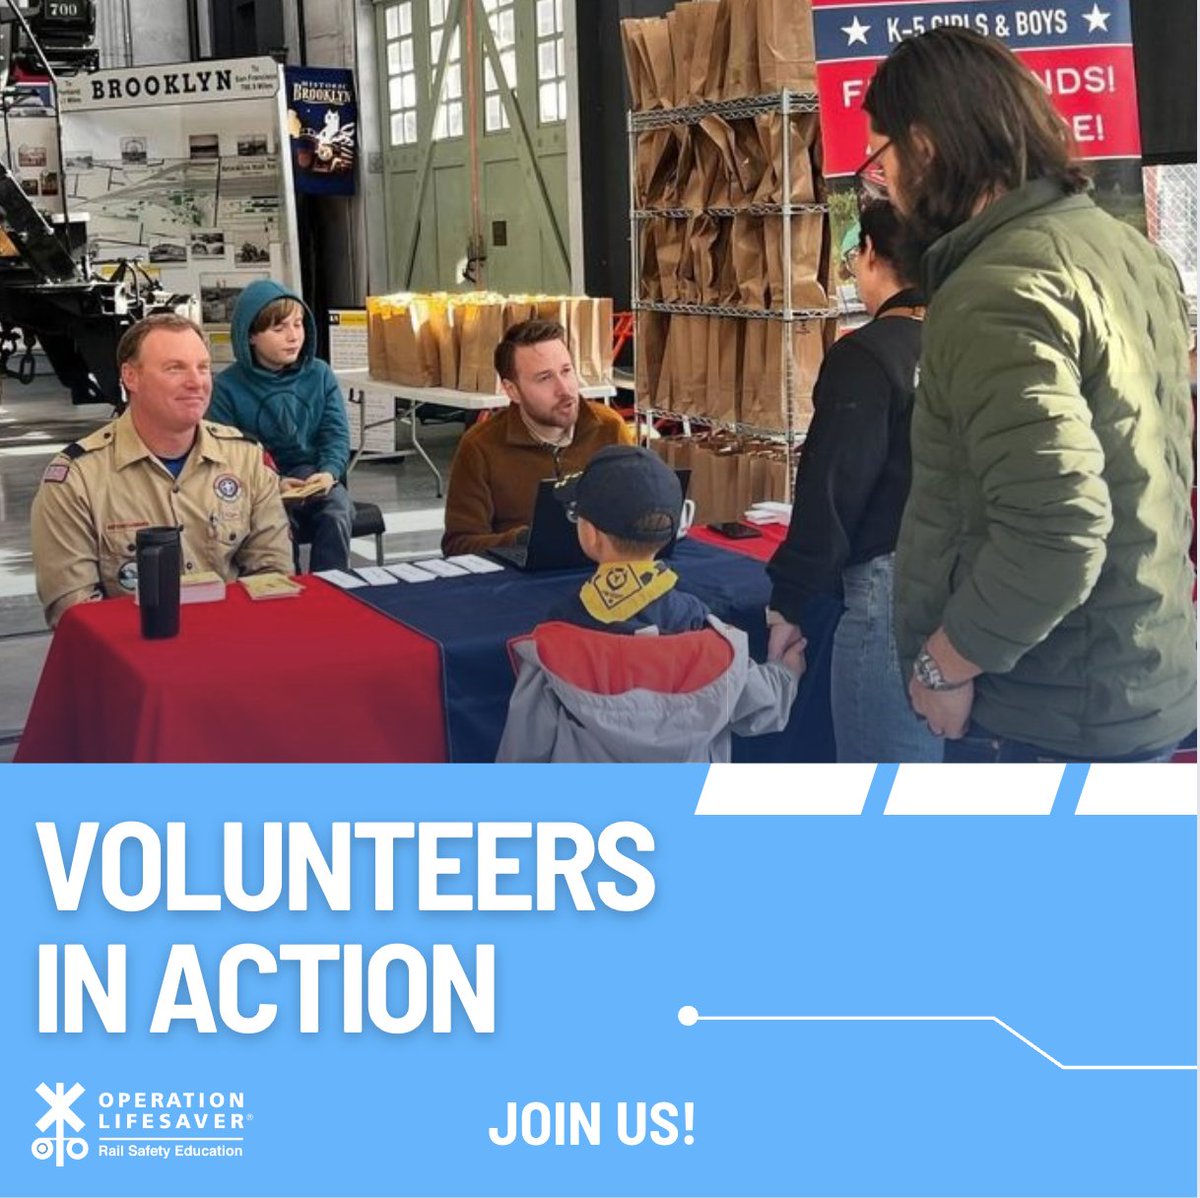 Oregon volunteer Matt B., left, was part of a recent event at the Oregon Rail Heritage Center sharing rail safety education with 200 Cub Scouts and chaperones. We are grateful to Matt and all our dedicated volunteers! Join us: bit.ly/3cAb0Oo